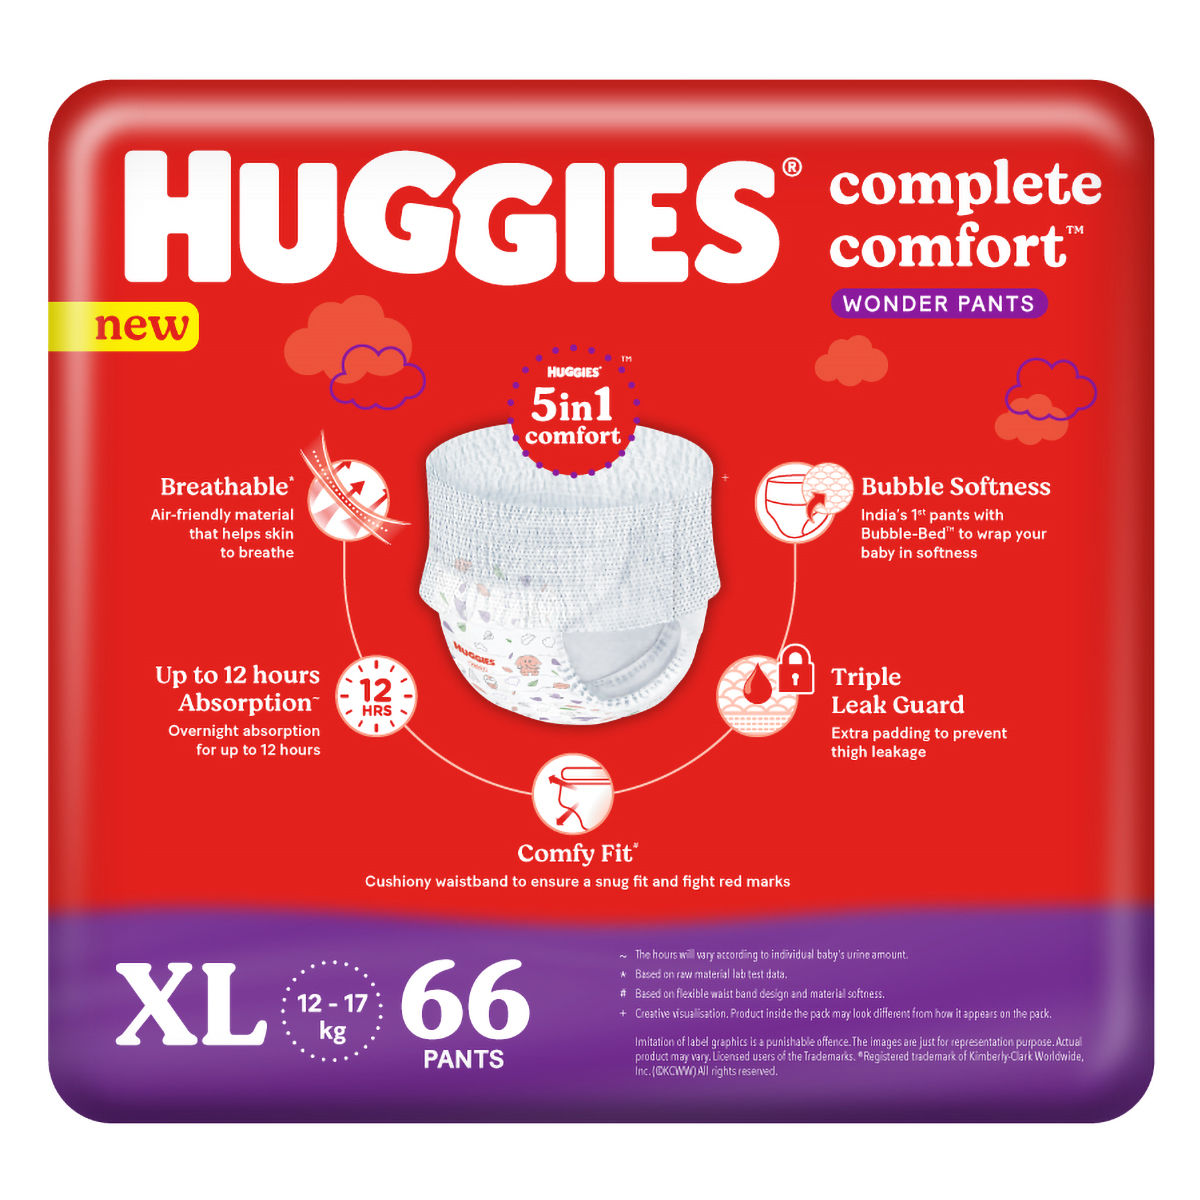 HUGGIES WONDER PANTS SXTRA SMALL XS 12 PACK OF 224 COUNT0